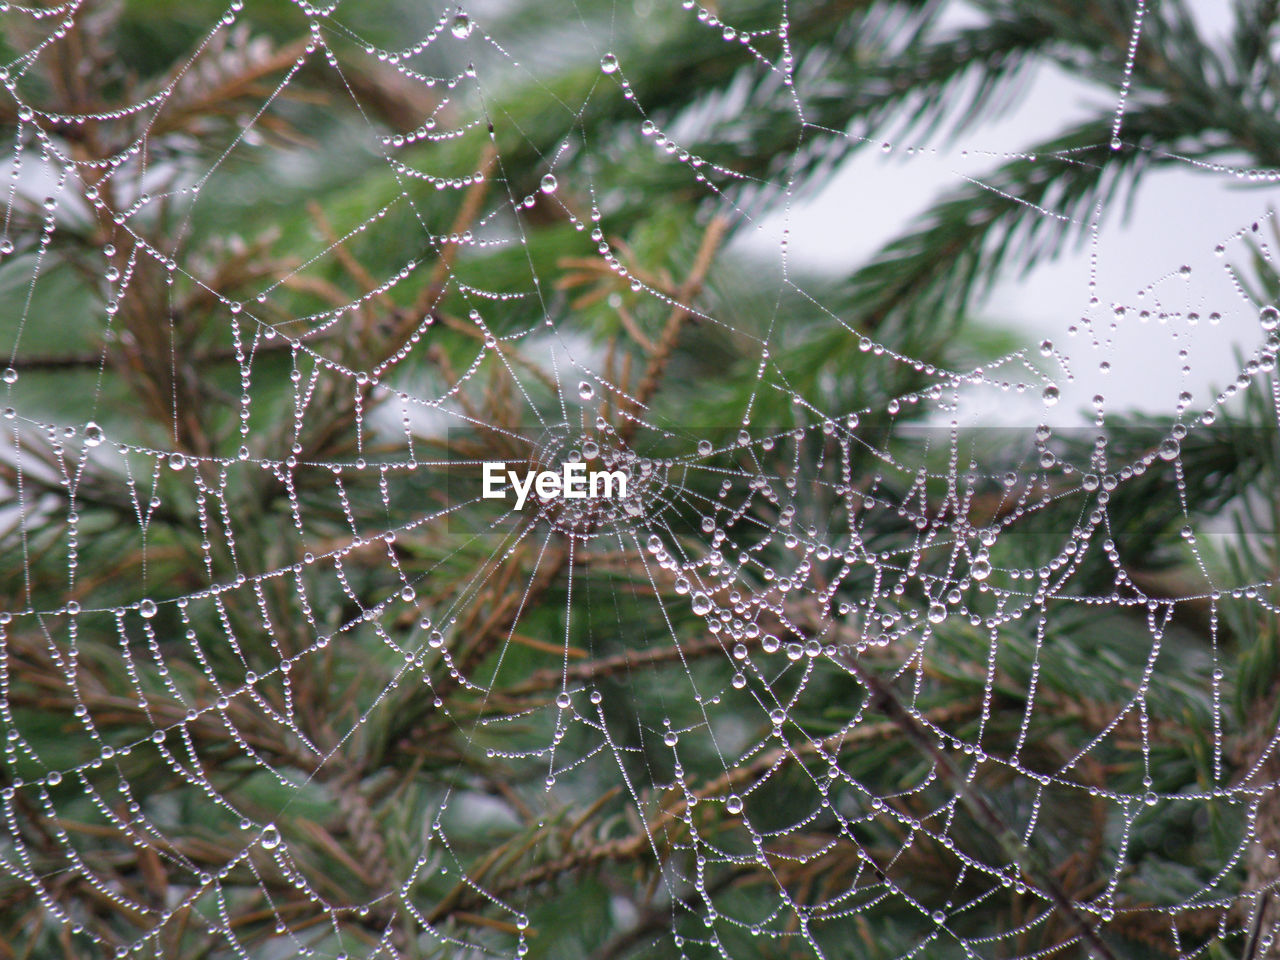 spider web, fragility, close-up, focus on foreground, wet, nature, drop, spider, no people, water, animal, plant, beauty in nature, day, pattern, complexity, outdoors, dew, full frame, backgrounds, intricacy, tranquility, rain, selective focus, environment, animal themes, trapped, moisture, tree, growth